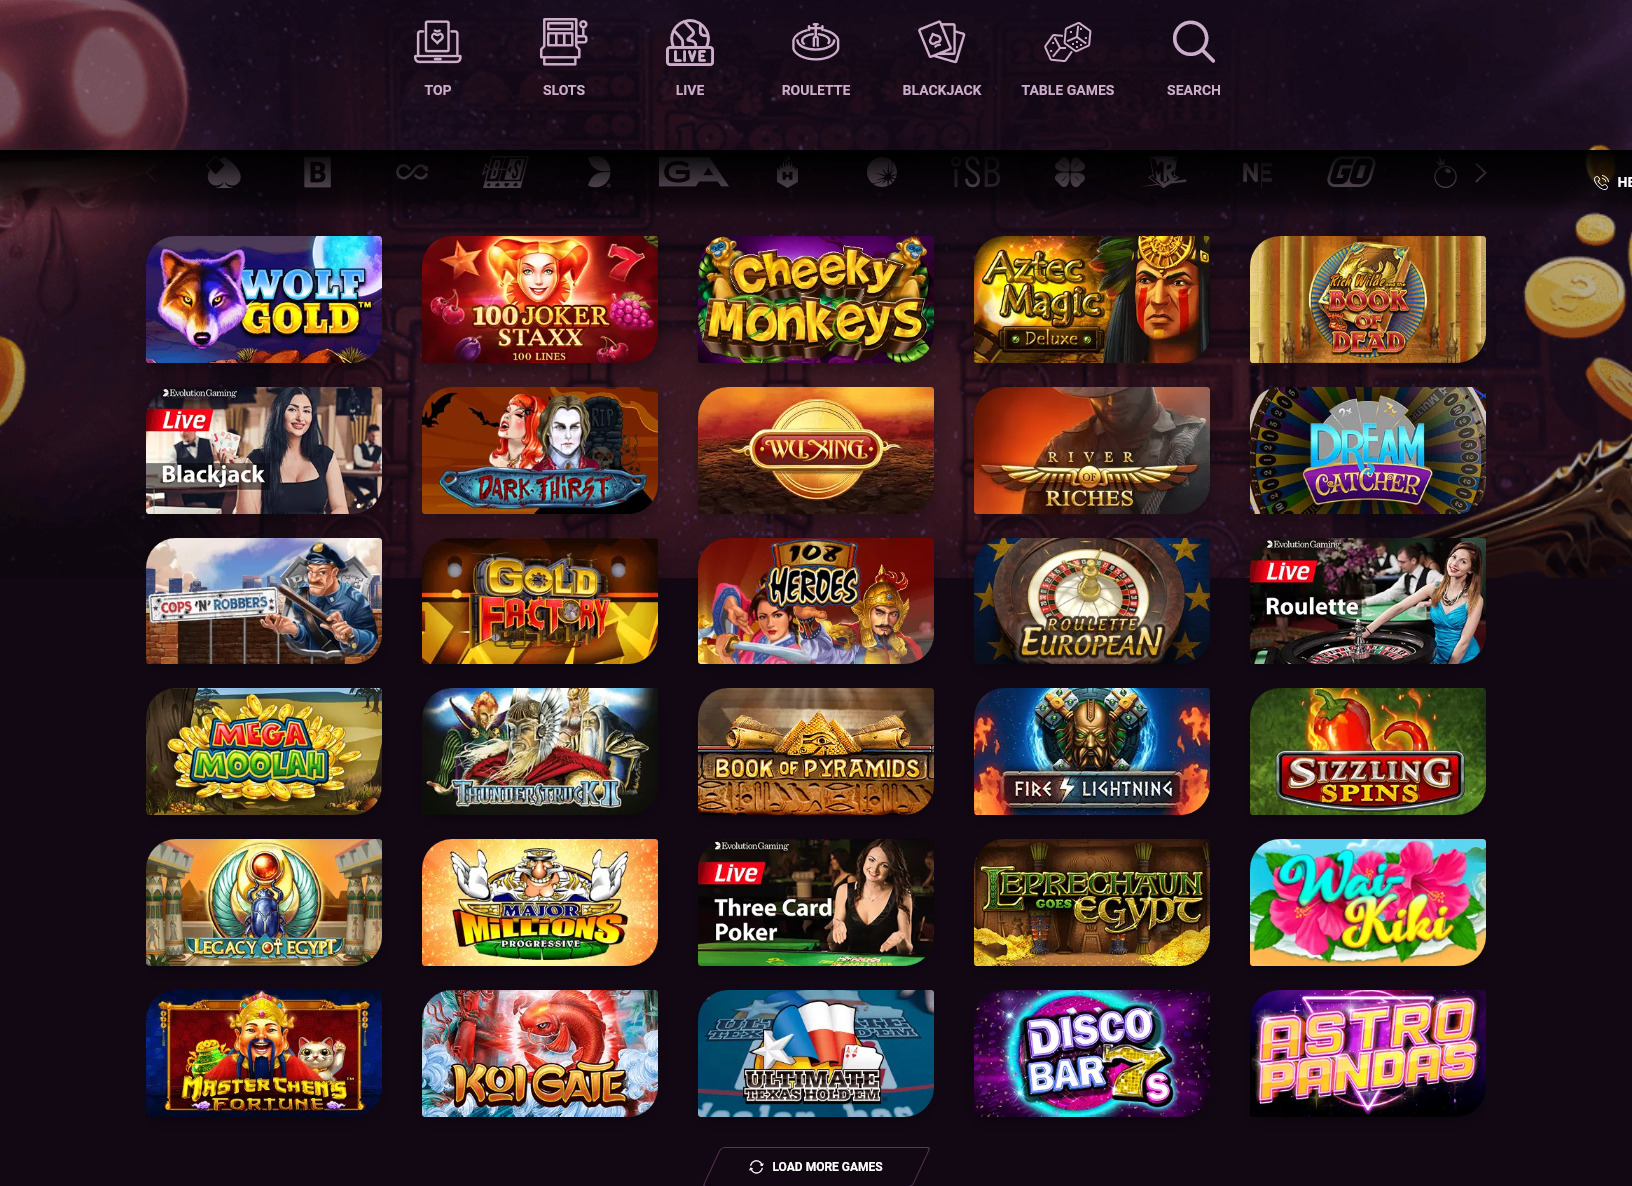 New online Casinos - Pros and Cons - Pay Attentions To These 25 Signals